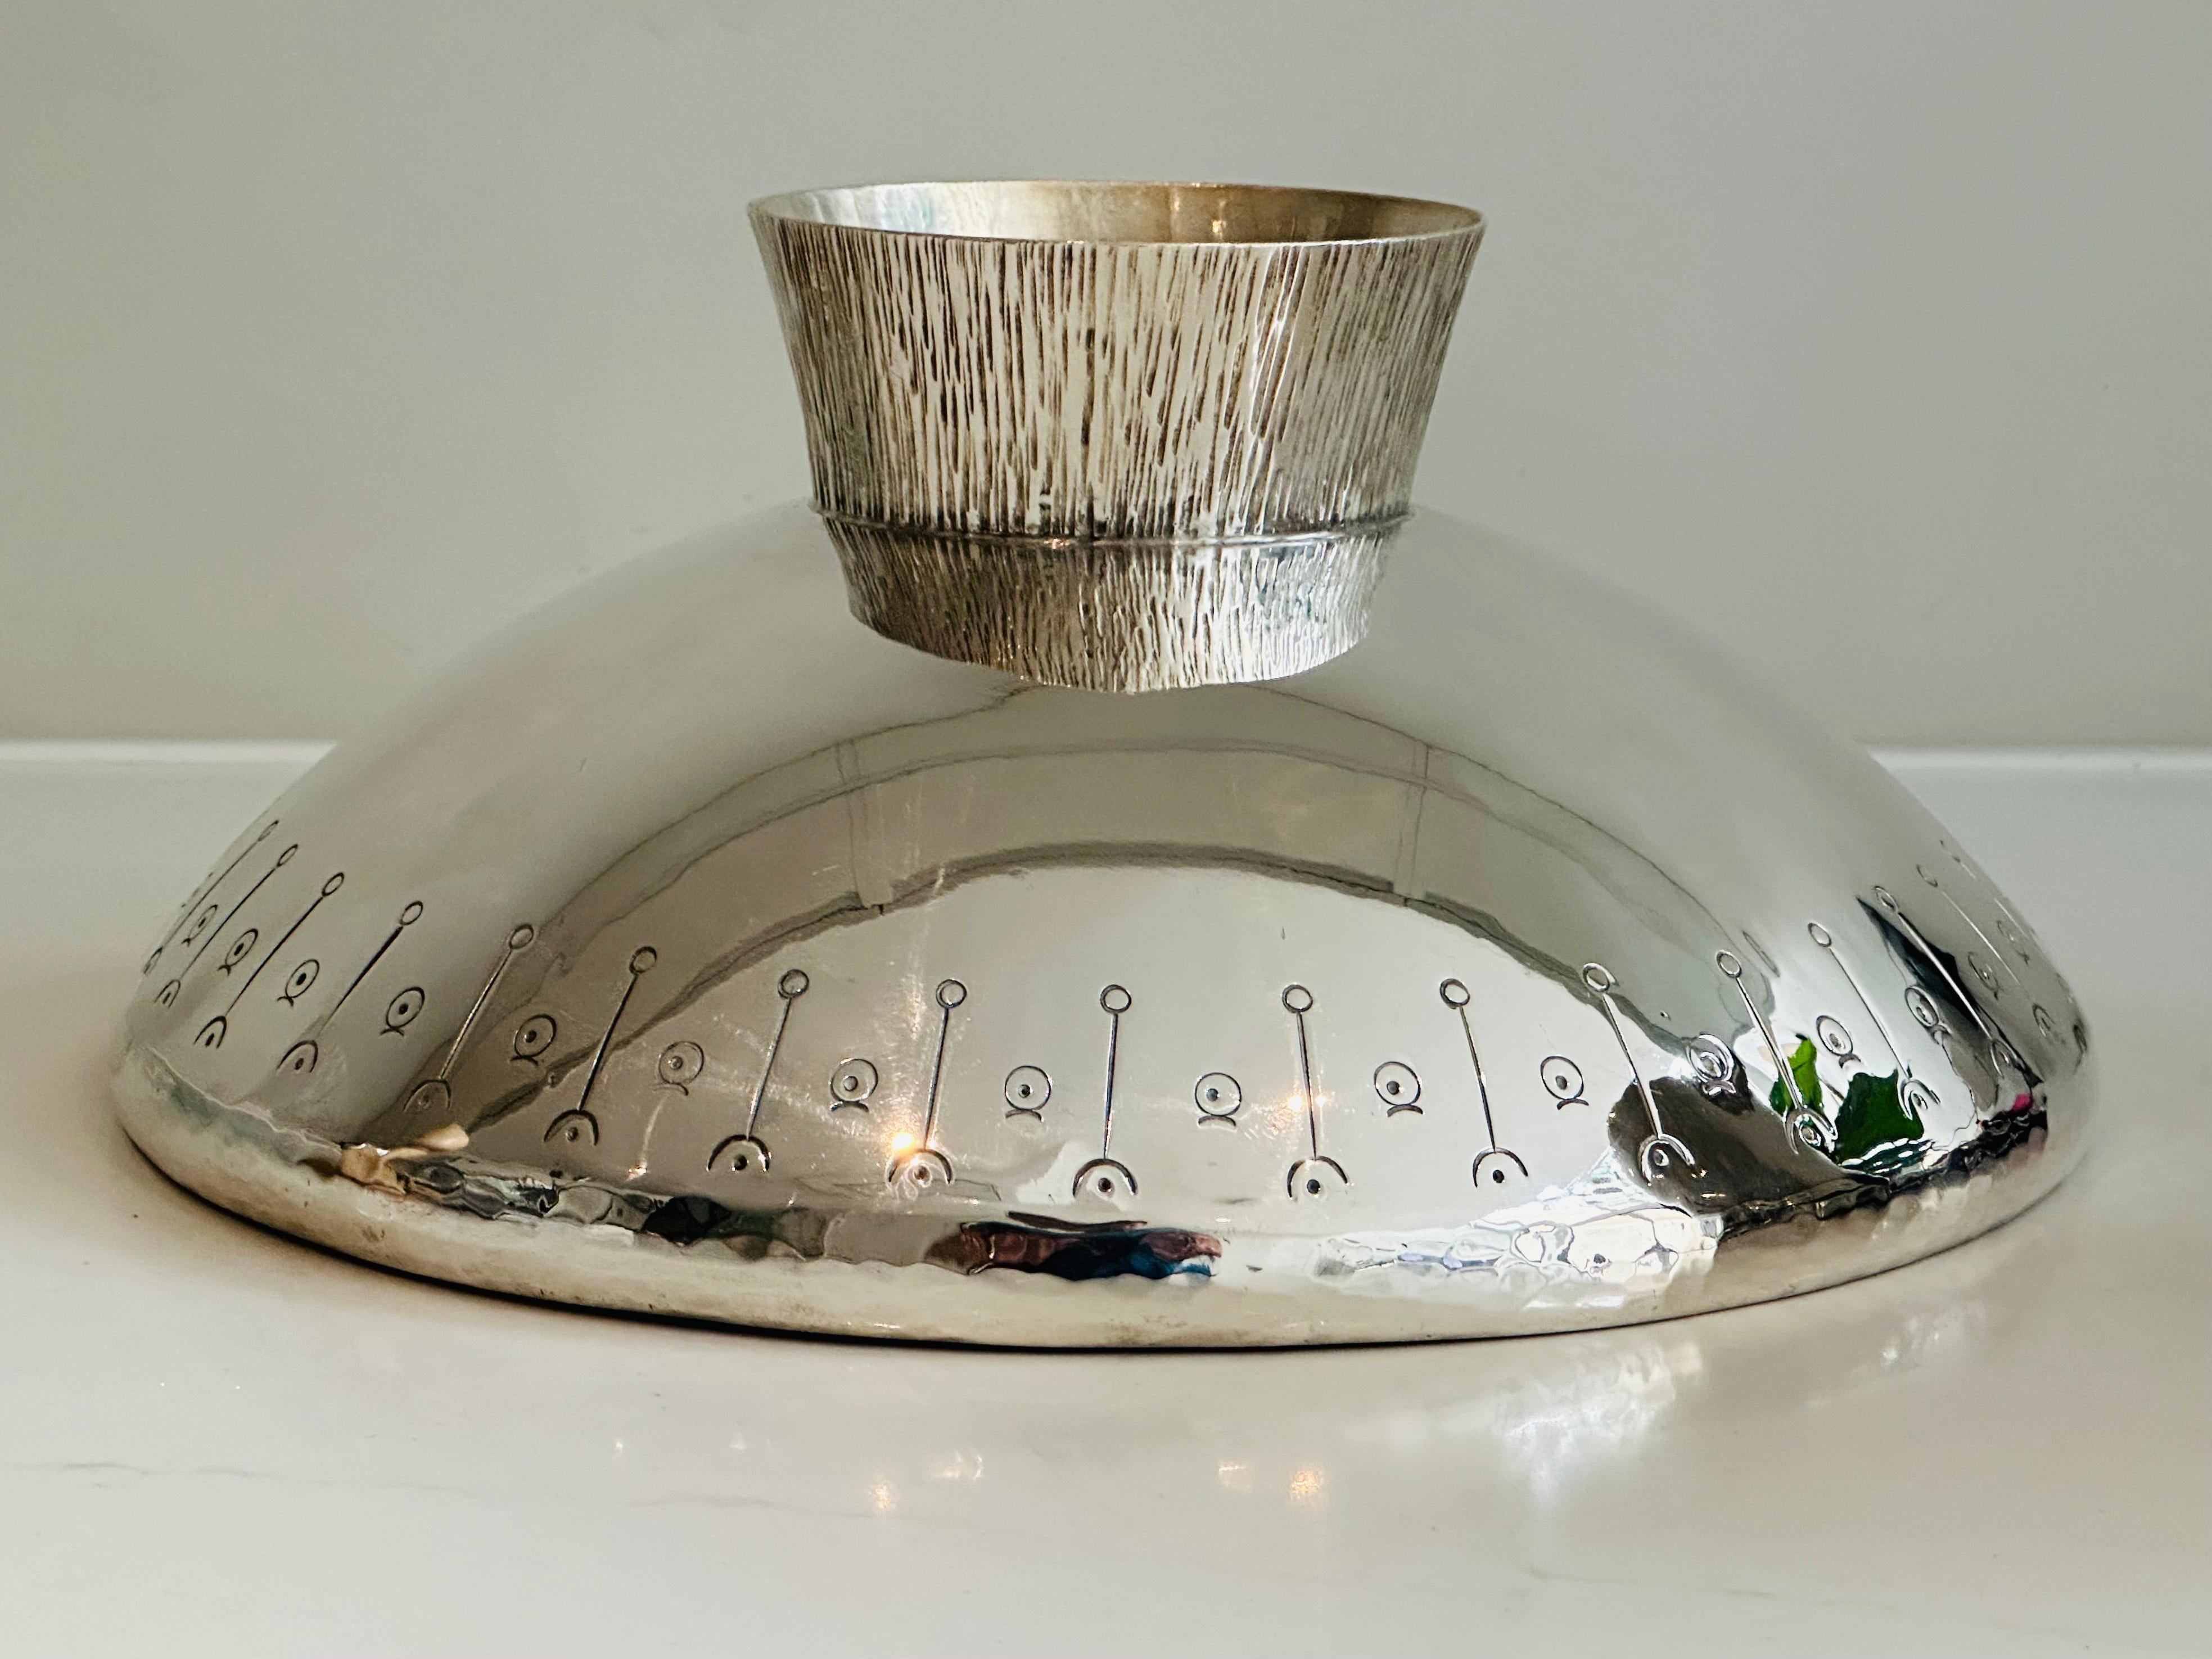 1980s English Silver Plated Decorative Hand-Hammered Serving or Display Bowl For Sale 11